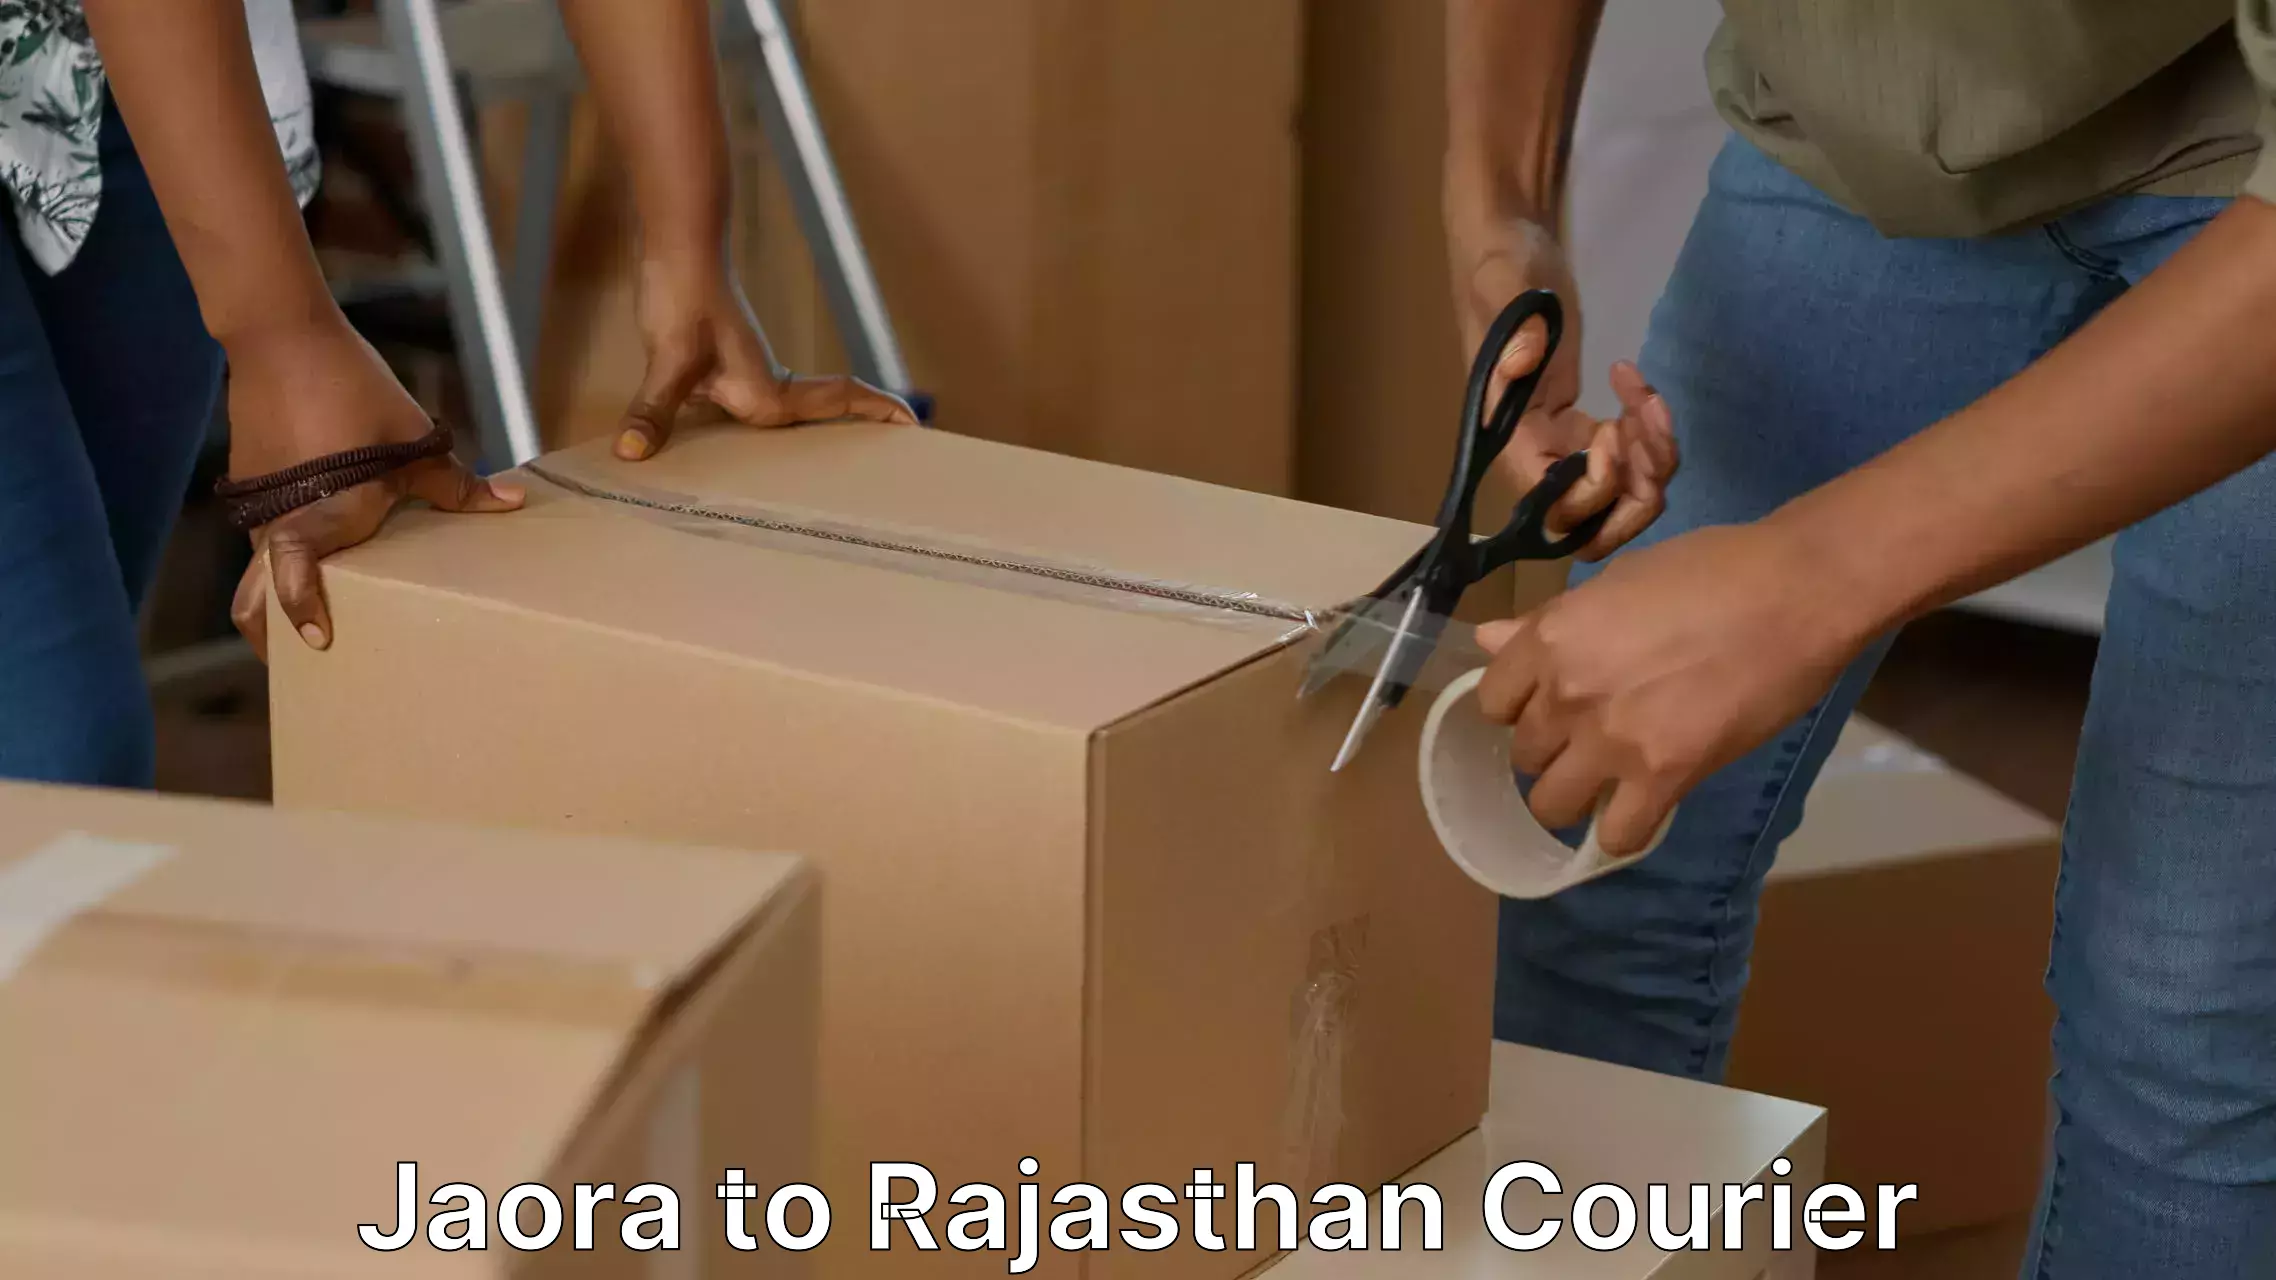 Furniture moving specialists Jaora to Rajasthan